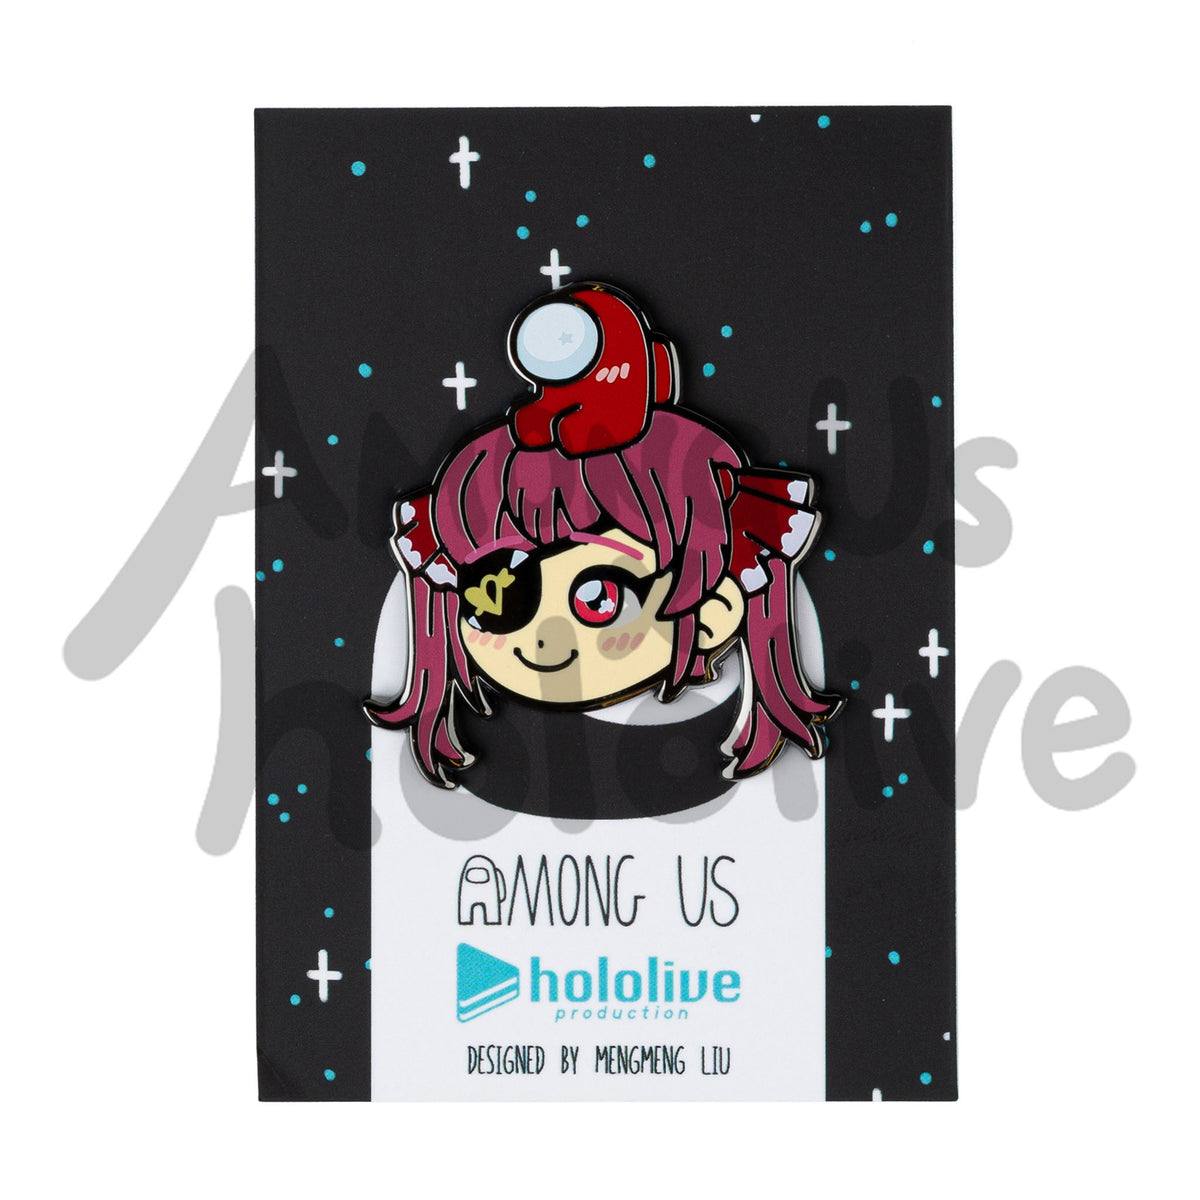 Hololive x Among Us black backing card covered with blue and white stars. There&#39;s a white Crewmate in the middle of the card covered up by an enamel pin of Marine&#39;s face a tiny Red Crewmate sitting atop her head. Backing Card text reads &quot;Among Us Hololive Production Designed by Mengmeng Liu.&quot;